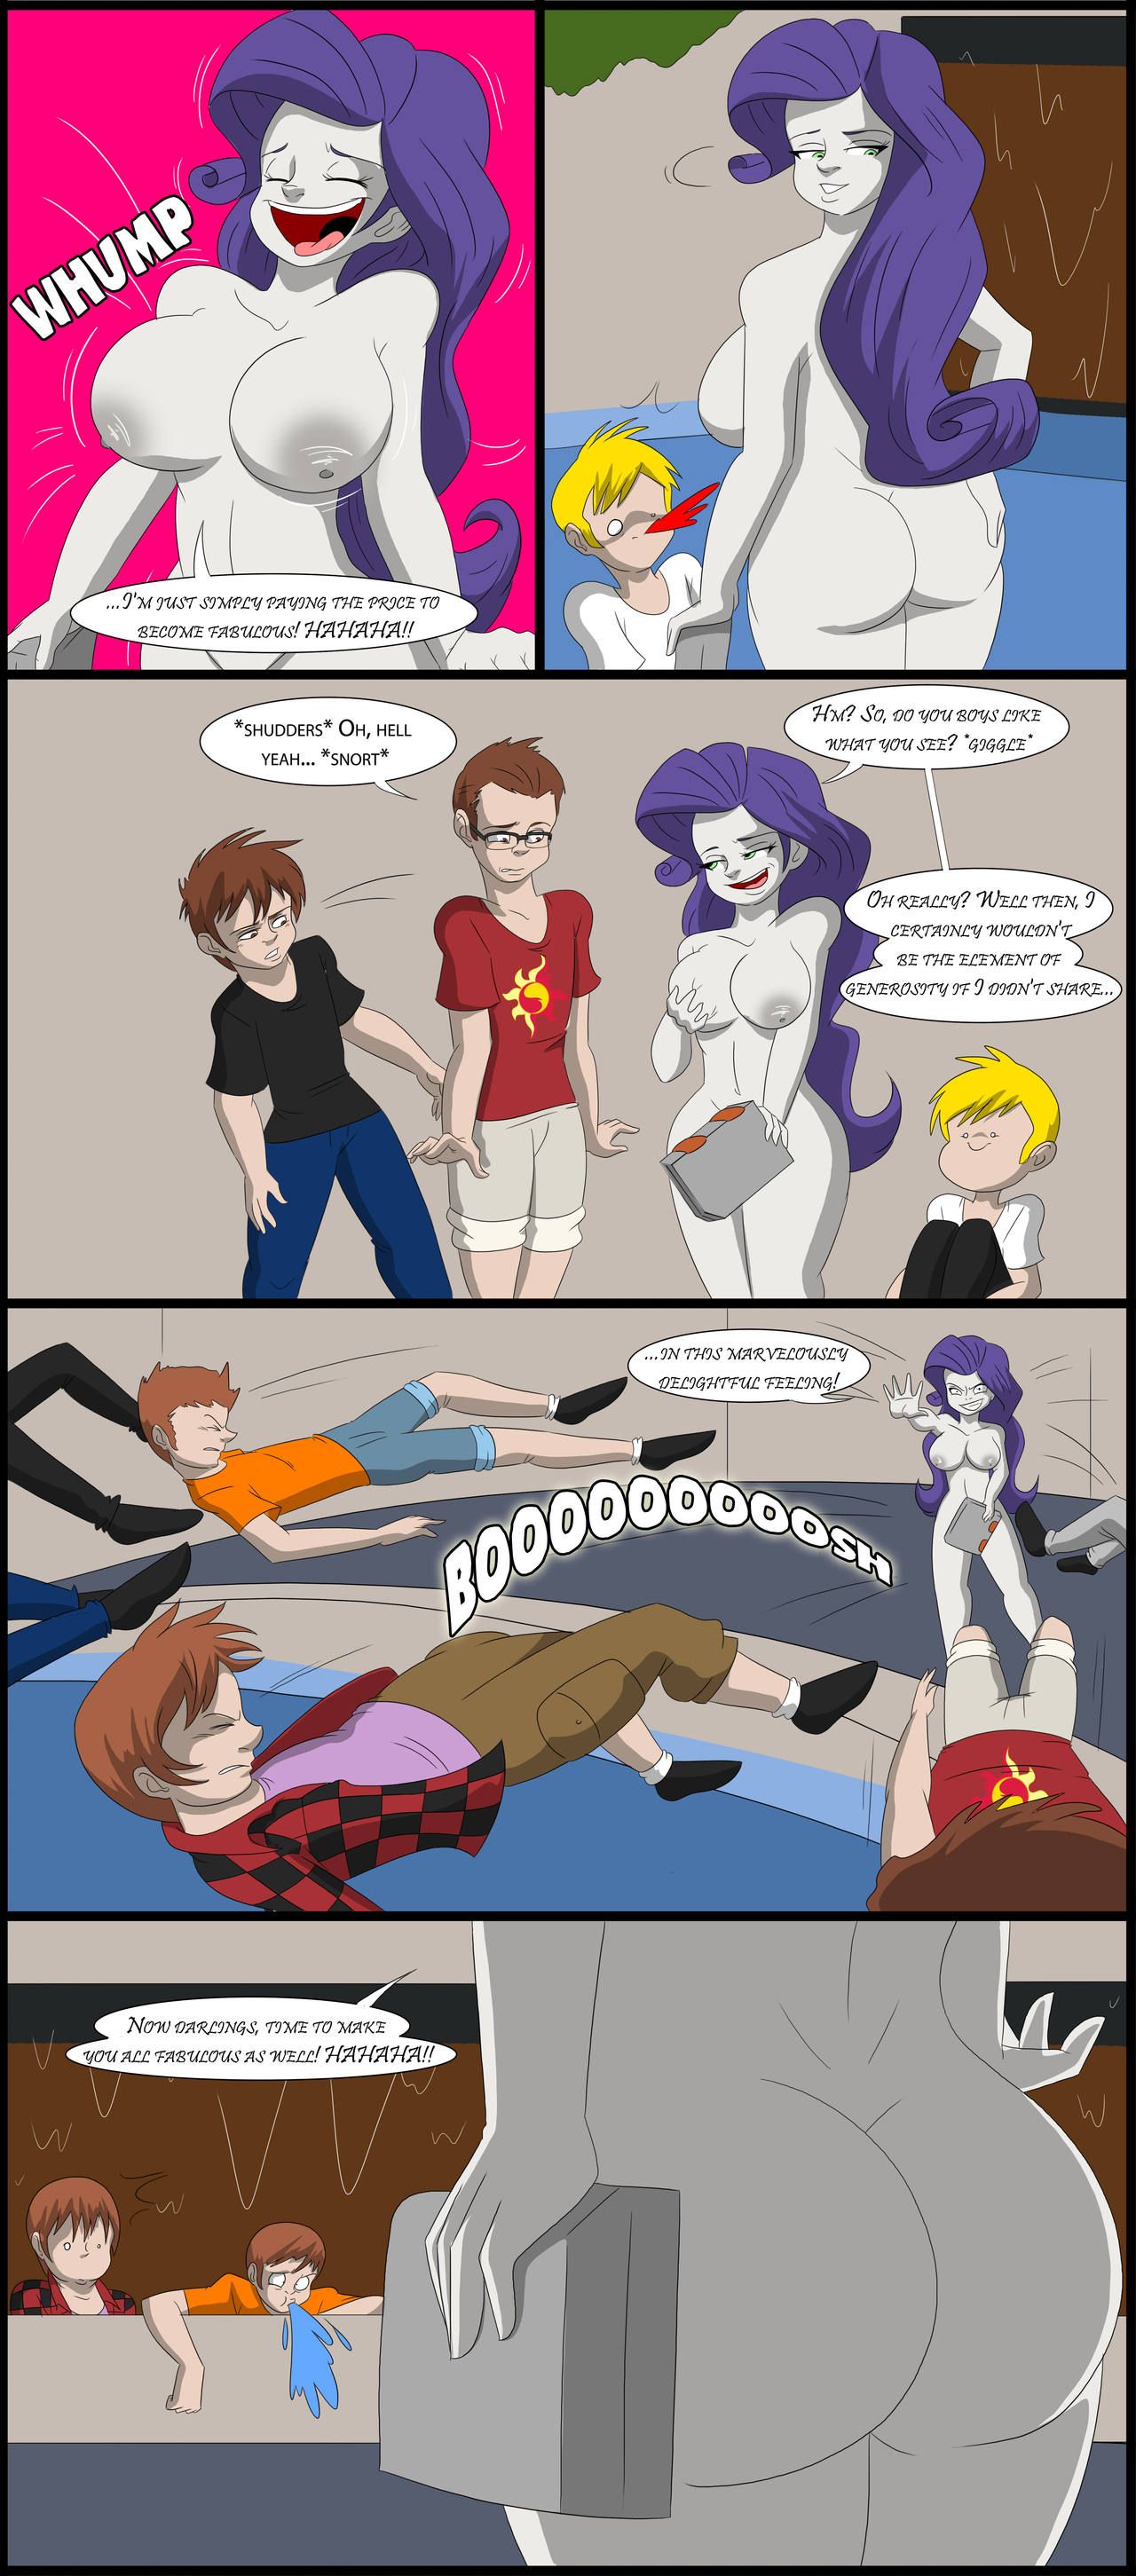 TFSubmissions - Mane Attraction MtF transformation comic 5